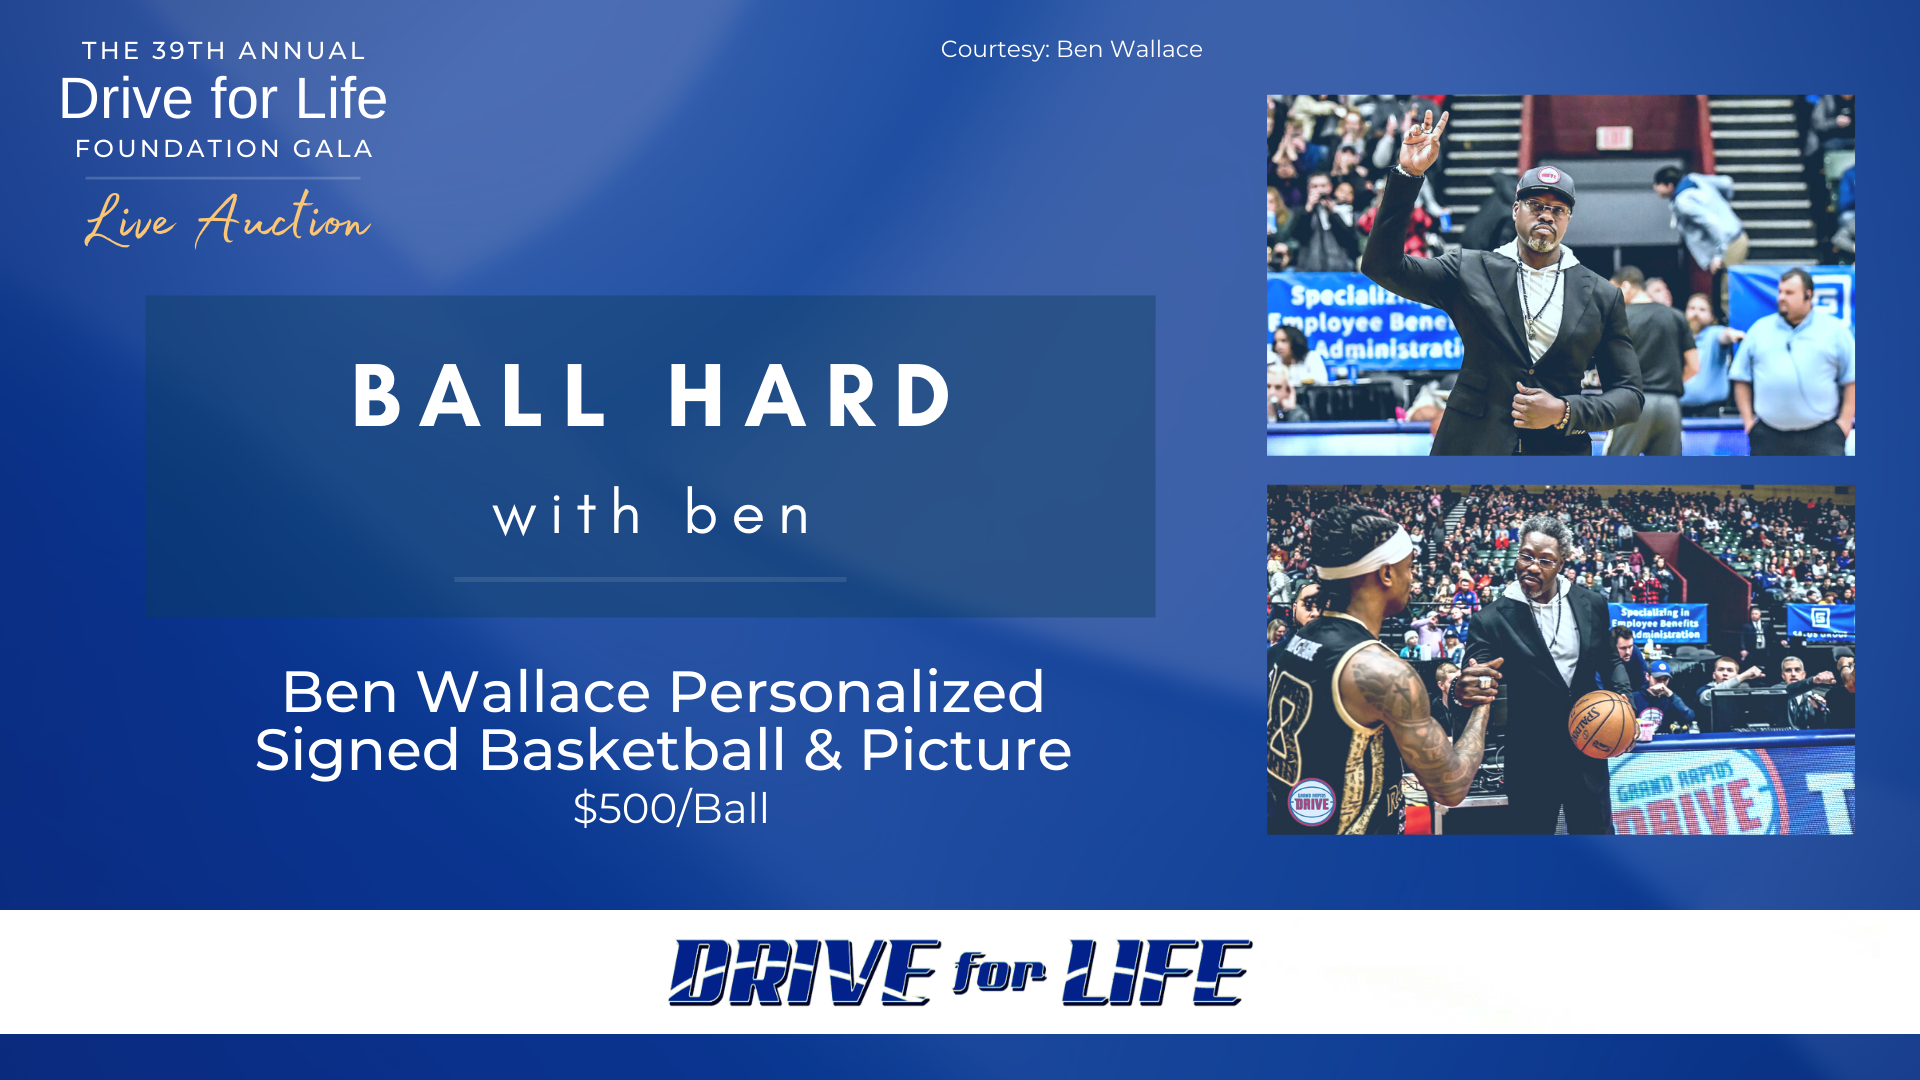 LIVE AUCTION EXPERIENCE: Ball Hard with Ben - Available at the 39th Annual Drive for Life Foundation Monday, September 13, 2021 at 6:30 p.m. at the Radisson Plaza Hotel in Kalamazoo, Mich.